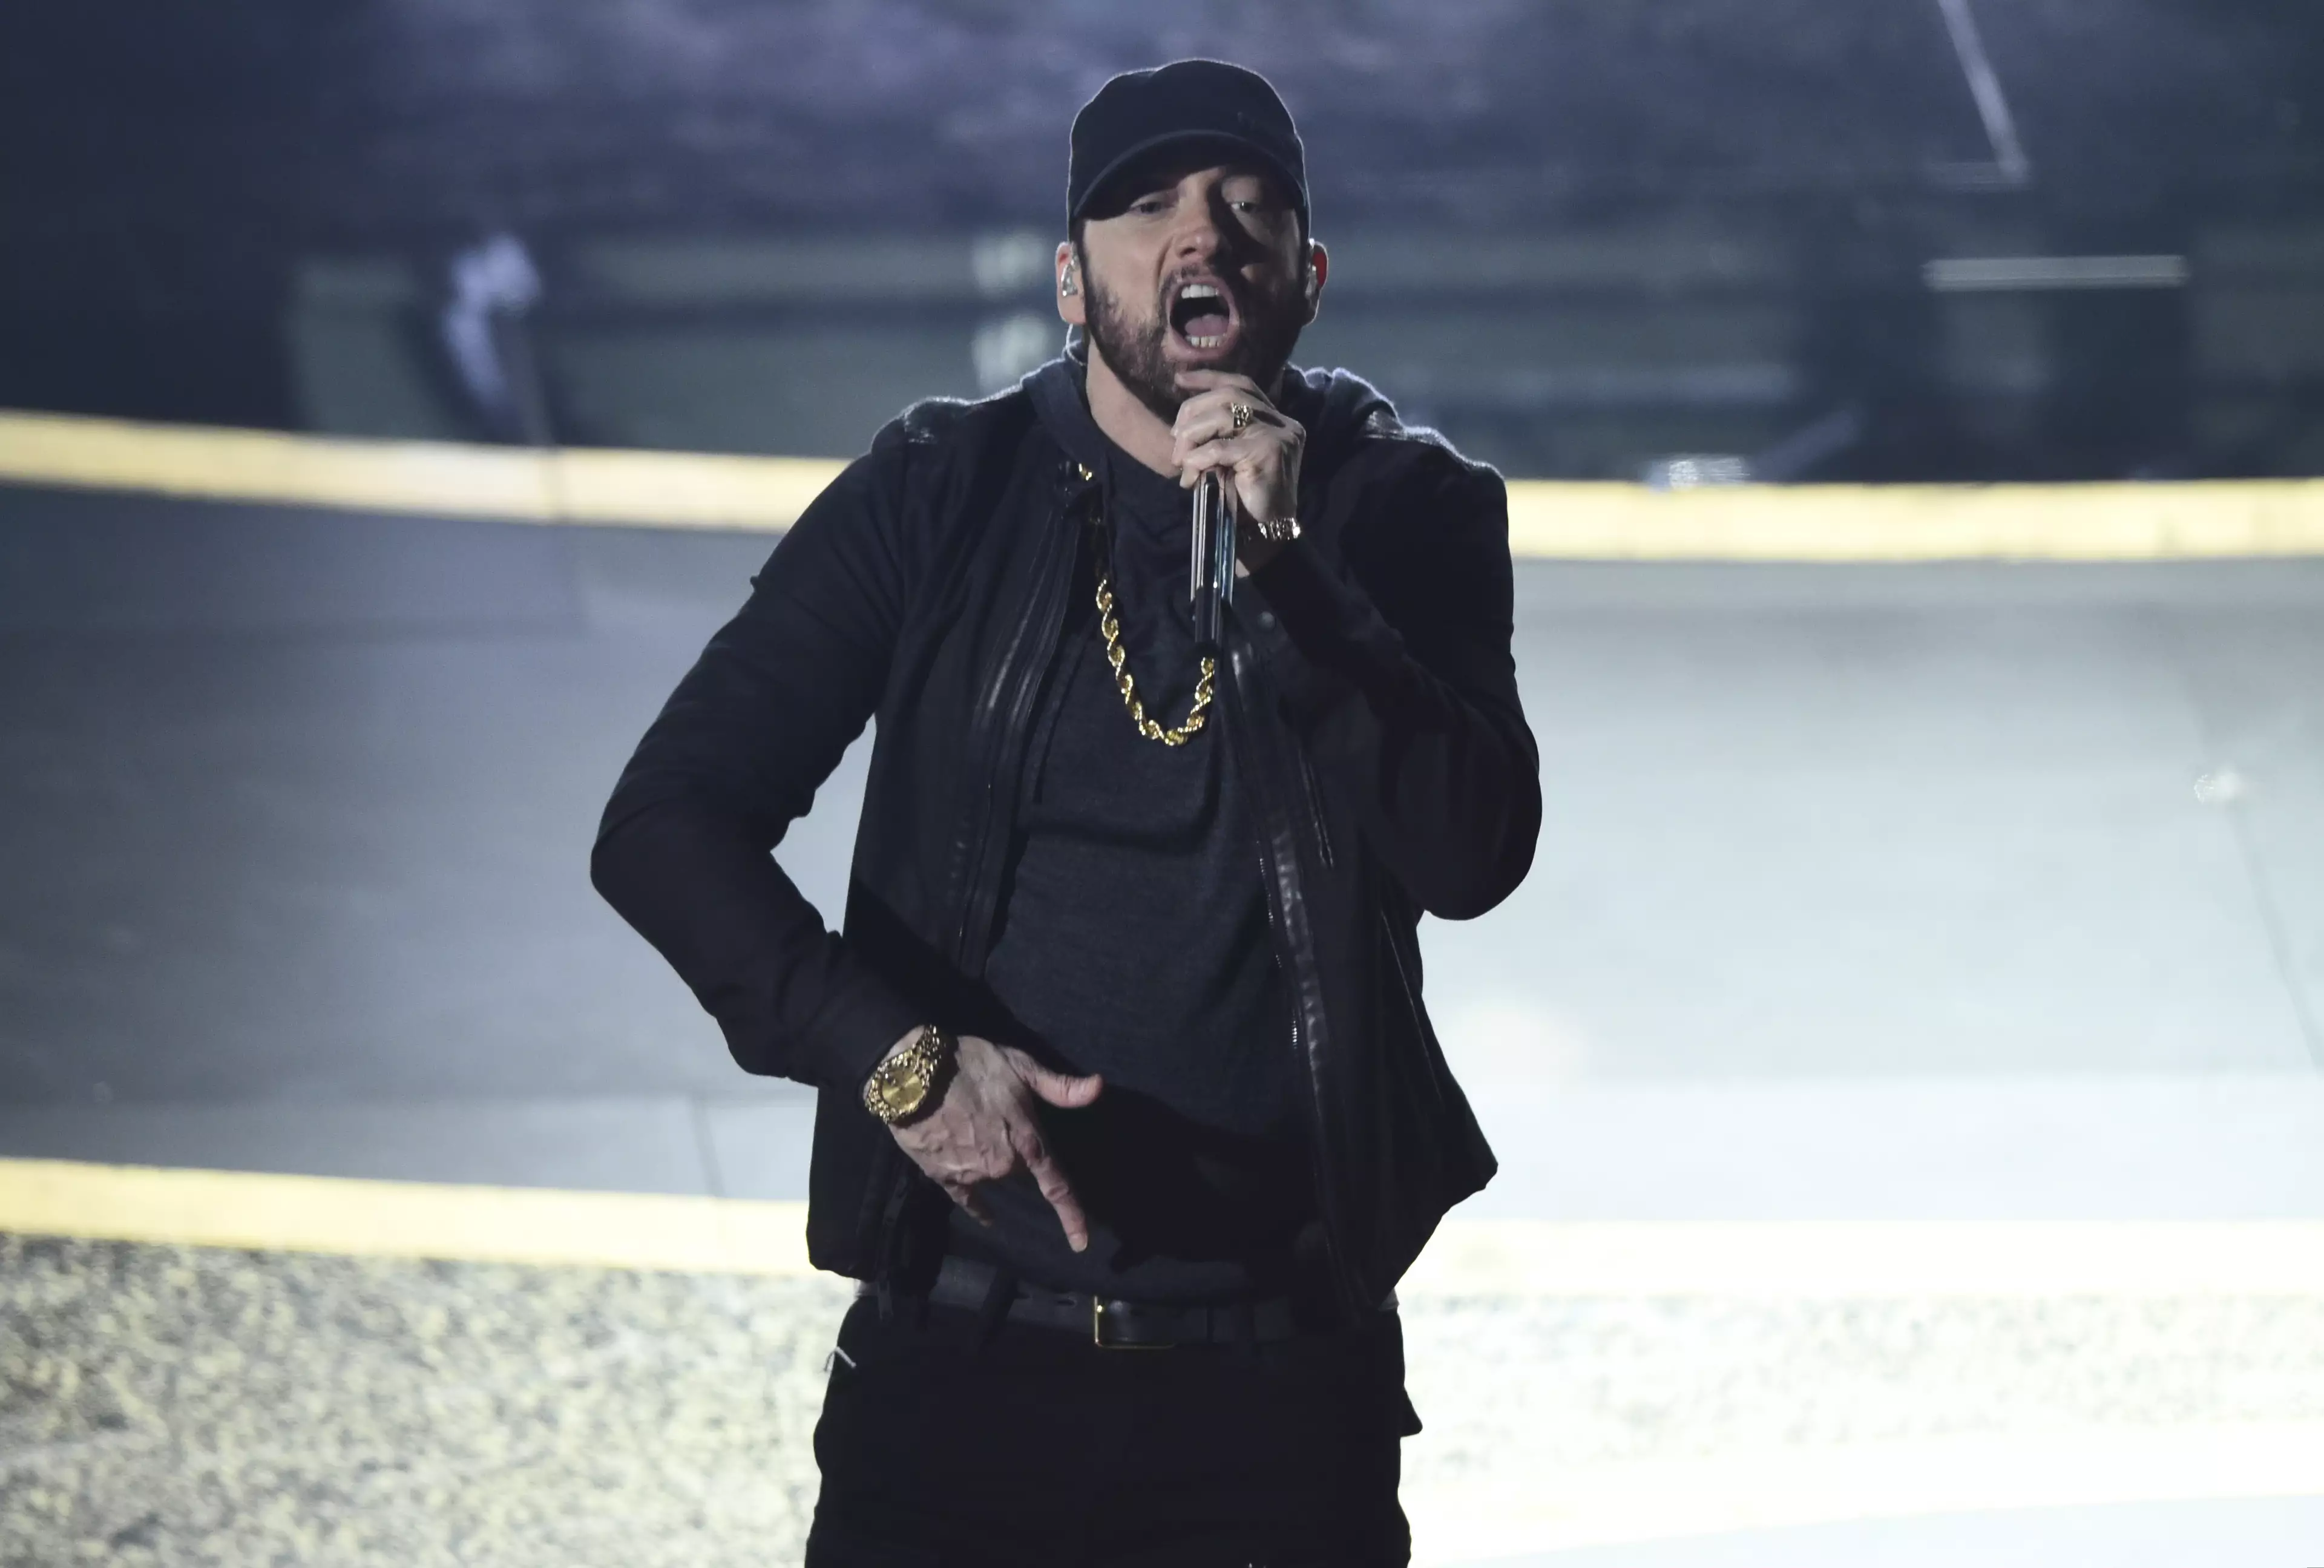 Eminem surprised the Oscars audience with his performance.